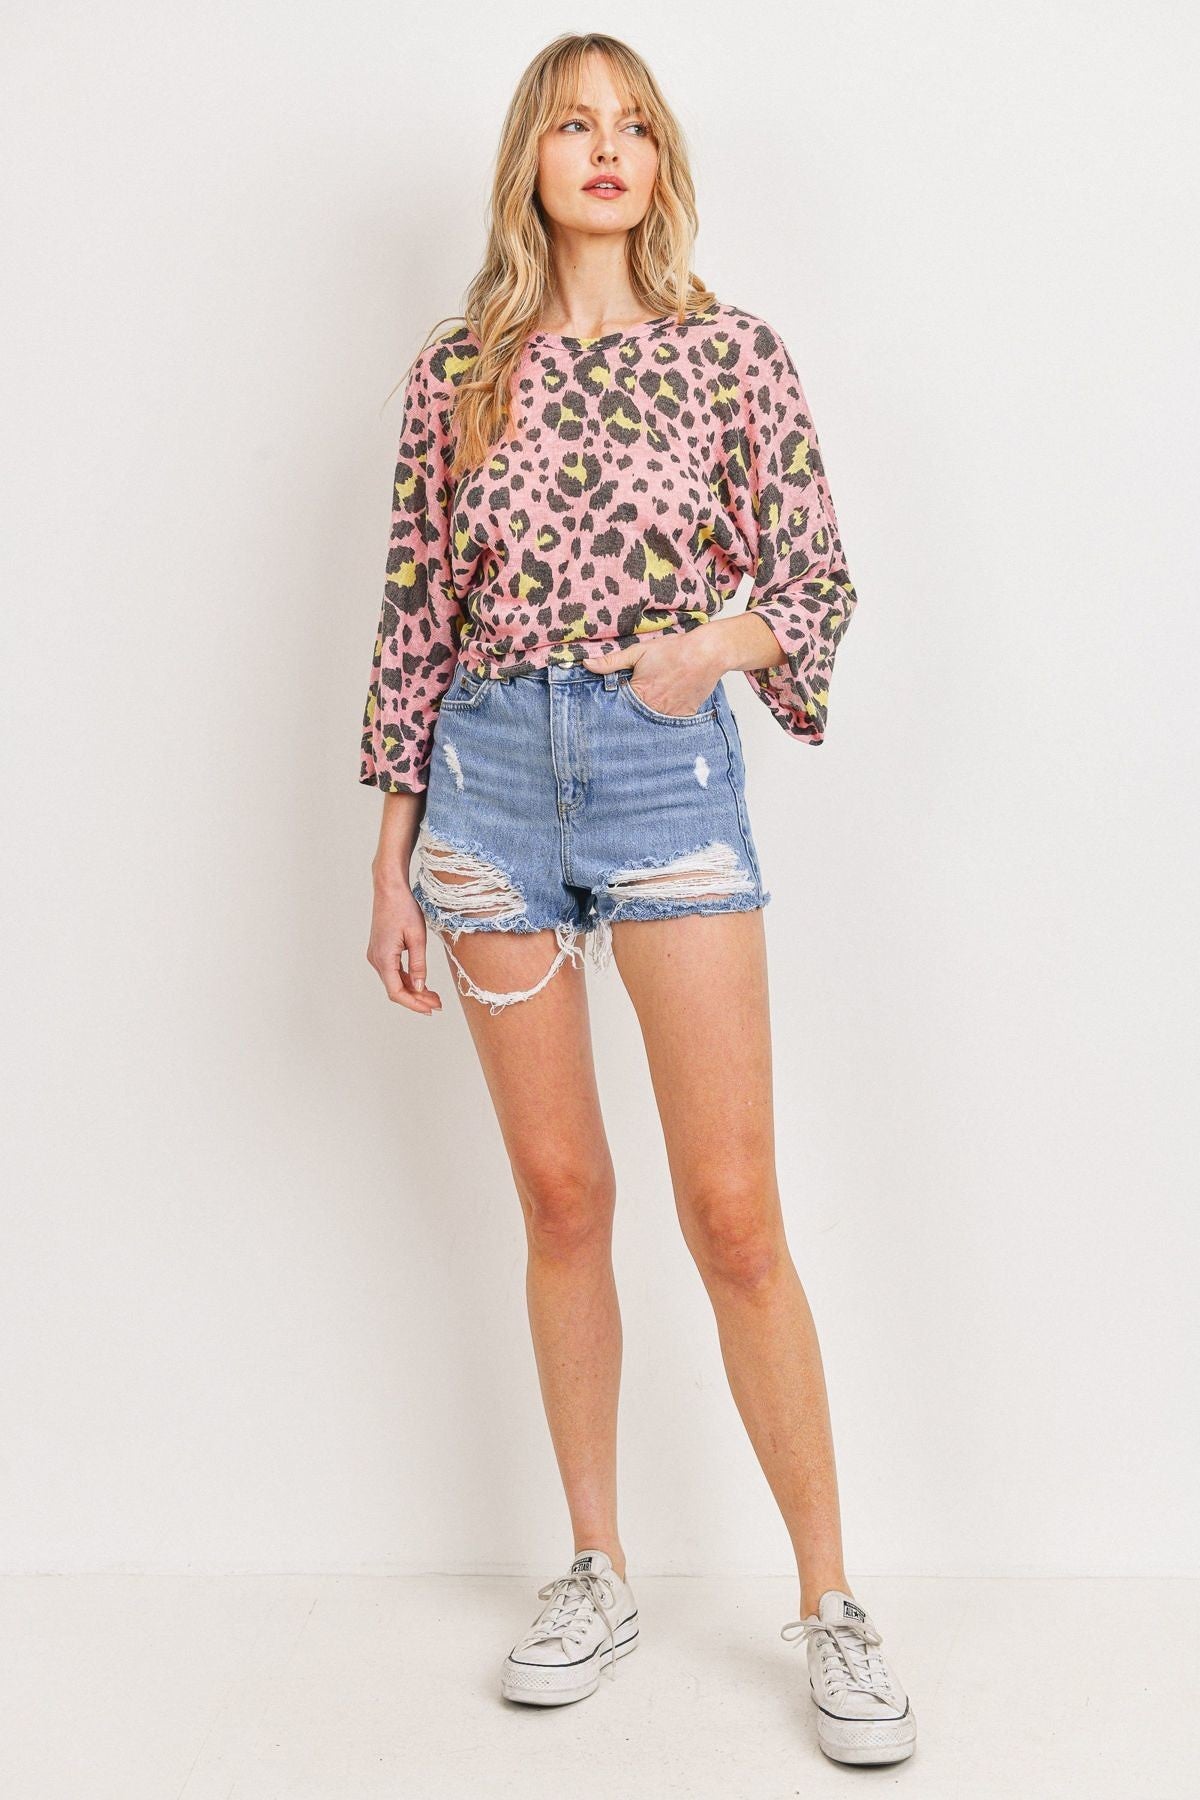 Leopard Knit Back Opened Short Sleeve Top - Fashion Quality Boutik